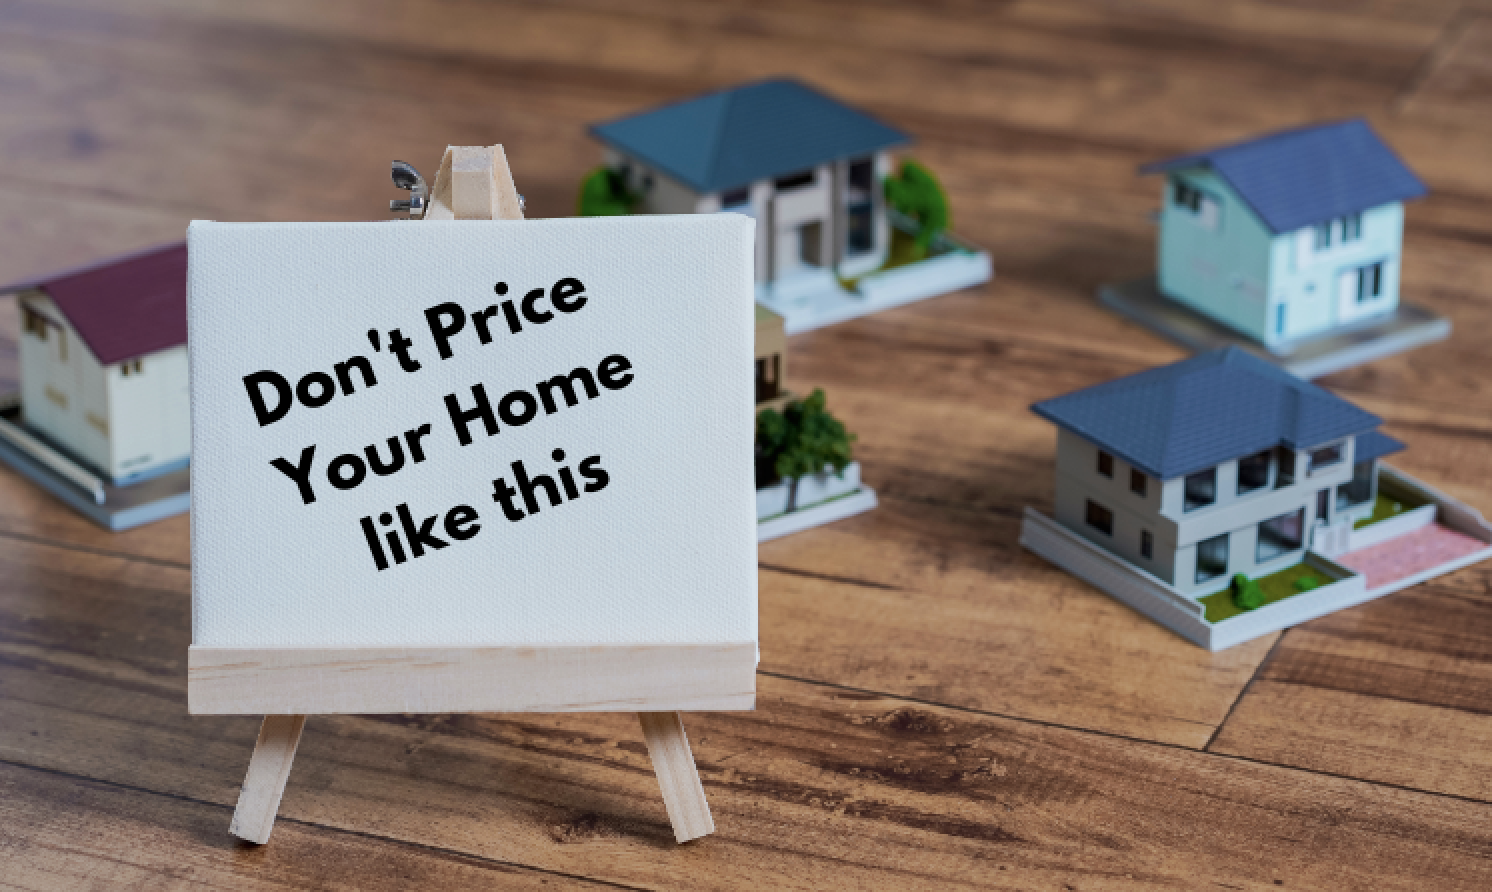 How Should I Price My Home